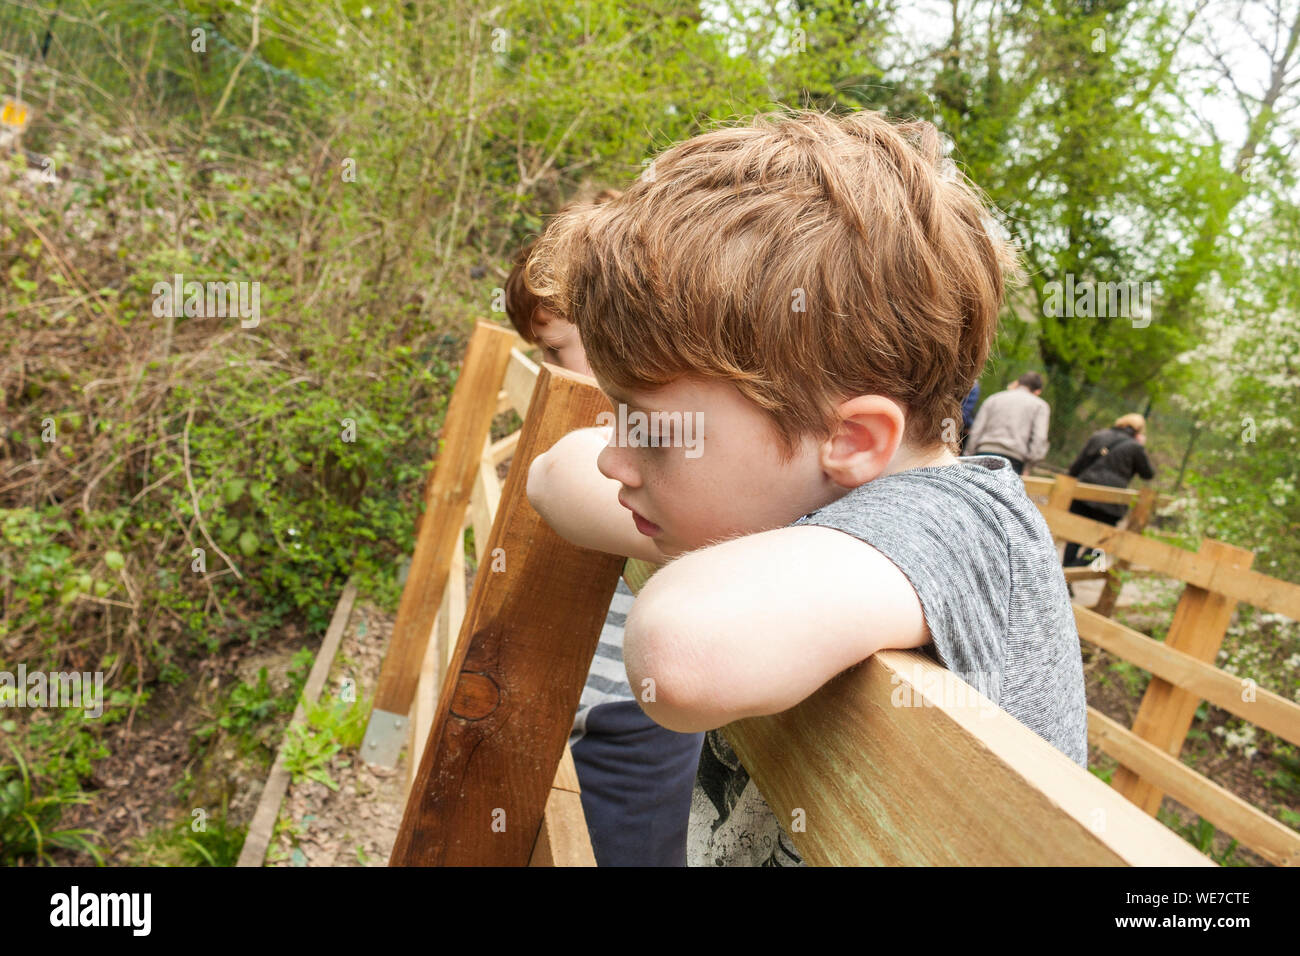 A young boy looking over a footbridge Stock Photo